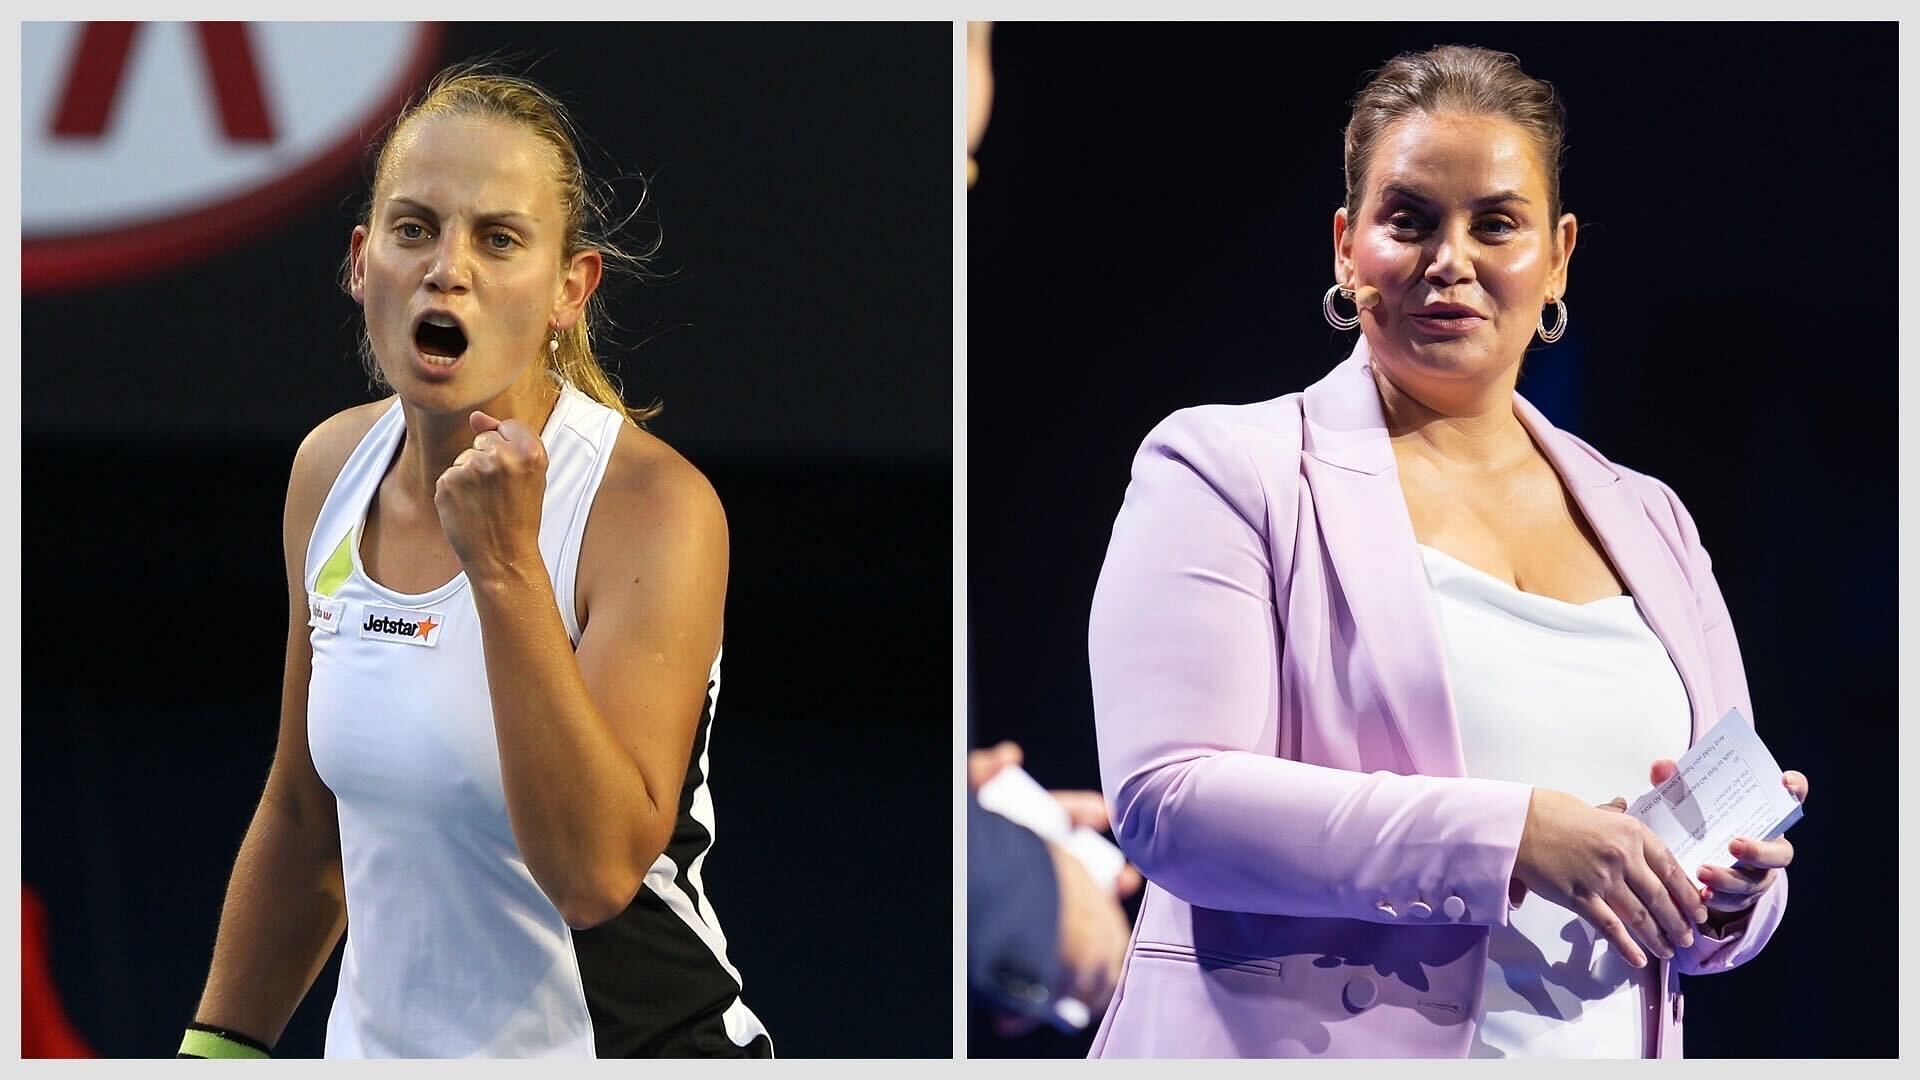 Jelena Dokic chose to take on the trolls with an elaborate social media write-up